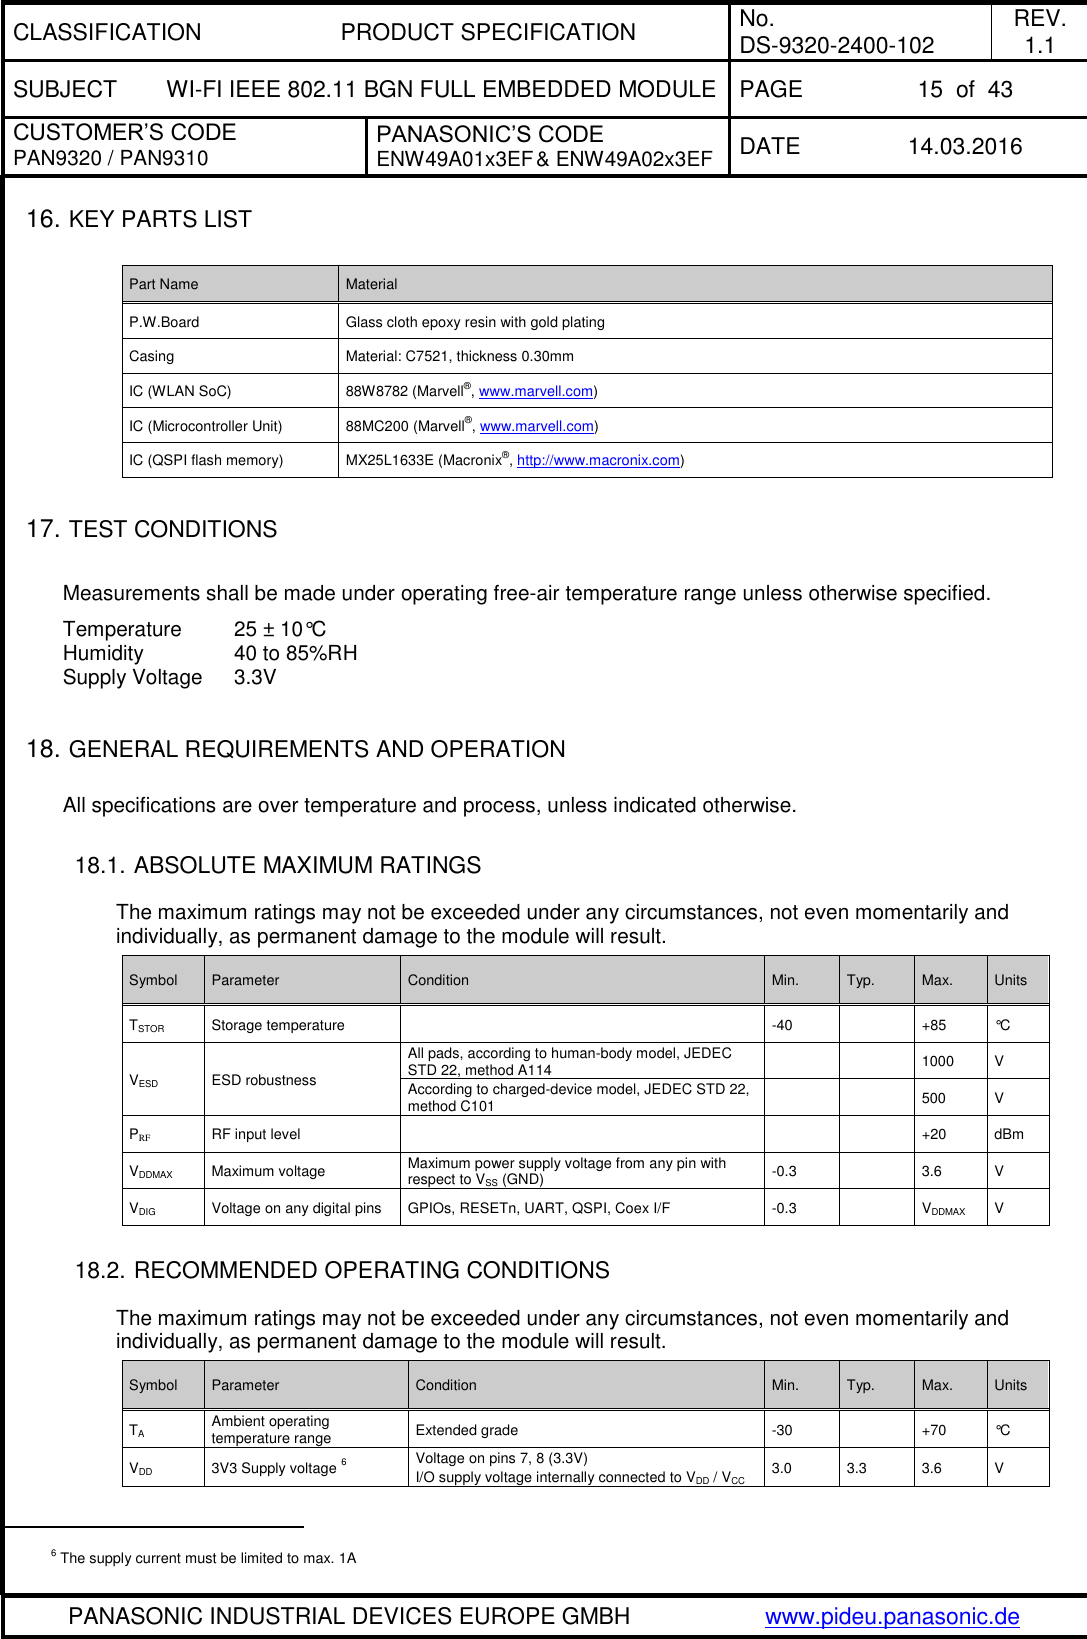 CLASSIFICATION PRODUCT SPECIFICATION No. DS-9320-2400-102 REV. 1.1 SUBJECT WI-FI IEEE 802.11 BGN FULL EMBEDDED MODULE PAGE 15  of  43 CUSTOMER’S CODE PAN9320 / PAN9310 PANASONIC’S CODE ENW49A01x3EF &amp; ENW49A02x3EF DATE 14.03.2016   PANASONIC INDUSTRIAL DEVICES EUROPE GMBH www.pideu.panasonic.de  16. KEY PARTS LIST  Part Name Material P.W.Board Glass cloth epoxy resin with gold plating Casing Material: C7521, thickness 0.30mm IC (WLAN SoC) 88W8782 (Marvell®, www.marvell.com) IC (Microcontroller Unit) 88MC200 (Marvell®, www.marvell.com) IC (QSPI flash memory) MX25L1633E (Macronix®, http://www.macronix.com)  17. TEST CONDITIONS  Measurements shall be made under operating free-air temperature range unless otherwise specified. Temperature      25 ± 10°C Humidity           40 to 85%RH Supply Voltage    3.3V   18. GENERAL REQUIREMENTS AND OPERATION  All specifications are over temperature and process, unless indicated otherwise.  18.1. ABSOLUTE MAXIMUM RATINGS  The maximum ratings may not be exceeded under any circumstances, not even momentarily and individually, as permanent damage to the module will result. Symbol Parameter Condition Min. Typ. Max. Units TSTOR Storage temperature  -40  +85 °C VESD ESD robustness All pads, according to human-body model, JEDEC STD 22, method A114   1000 V According to charged-device model, JEDEC STD 22, method C101   500 V PRF RF input level    +20 dBm VDDMAX Maximum voltage Maximum power supply voltage from any pin with respect to VSS (GND) -0.3  3.6 V VDIG Voltage on any digital pins GPIOs, RESETn, UART, QSPI, Coex I/F -0.3  VDDMAX V  18.2. RECOMMENDED OPERATING CONDITIONS  The maximum ratings may not be exceeded under any circumstances, not even momentarily and individually, as permanent damage to the module will result. Symbol Parameter Condition Min. Typ. Max. Units TA Ambient operating temperature range Extended grade -30  +70 °C VDD 3V3 Supply voltage 6 Voltage on pins 7, 8 (3.3V) I/O supply voltage internally connected to VDD / VCC 3.0 3.3 3.6 V                                                 6 The supply current must be limited to max. 1A 